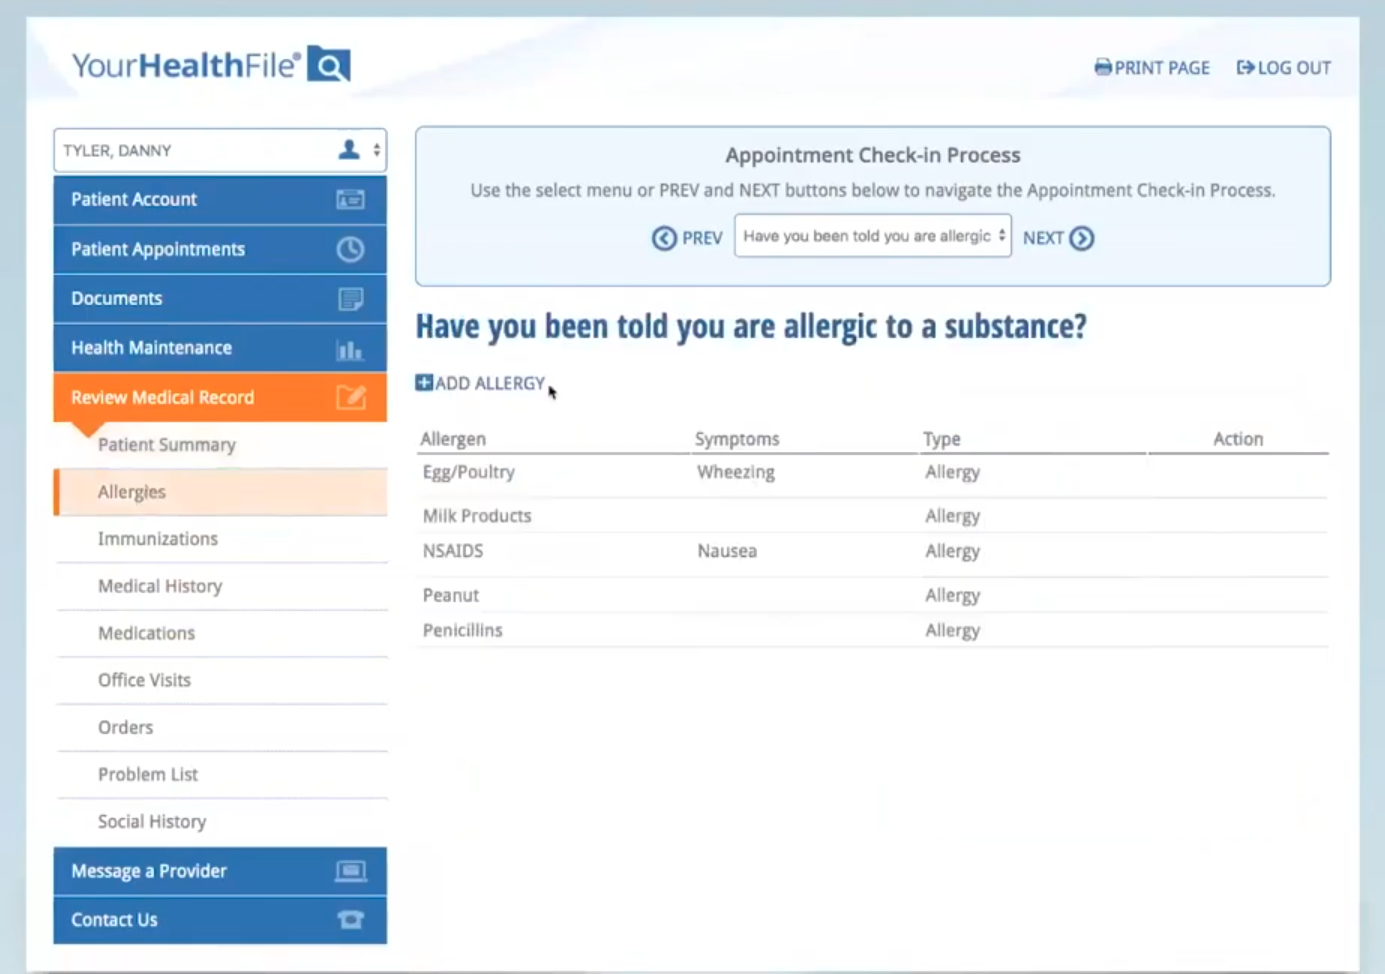 Allergies that are uploaded into NextGen can be shared with other provider locations